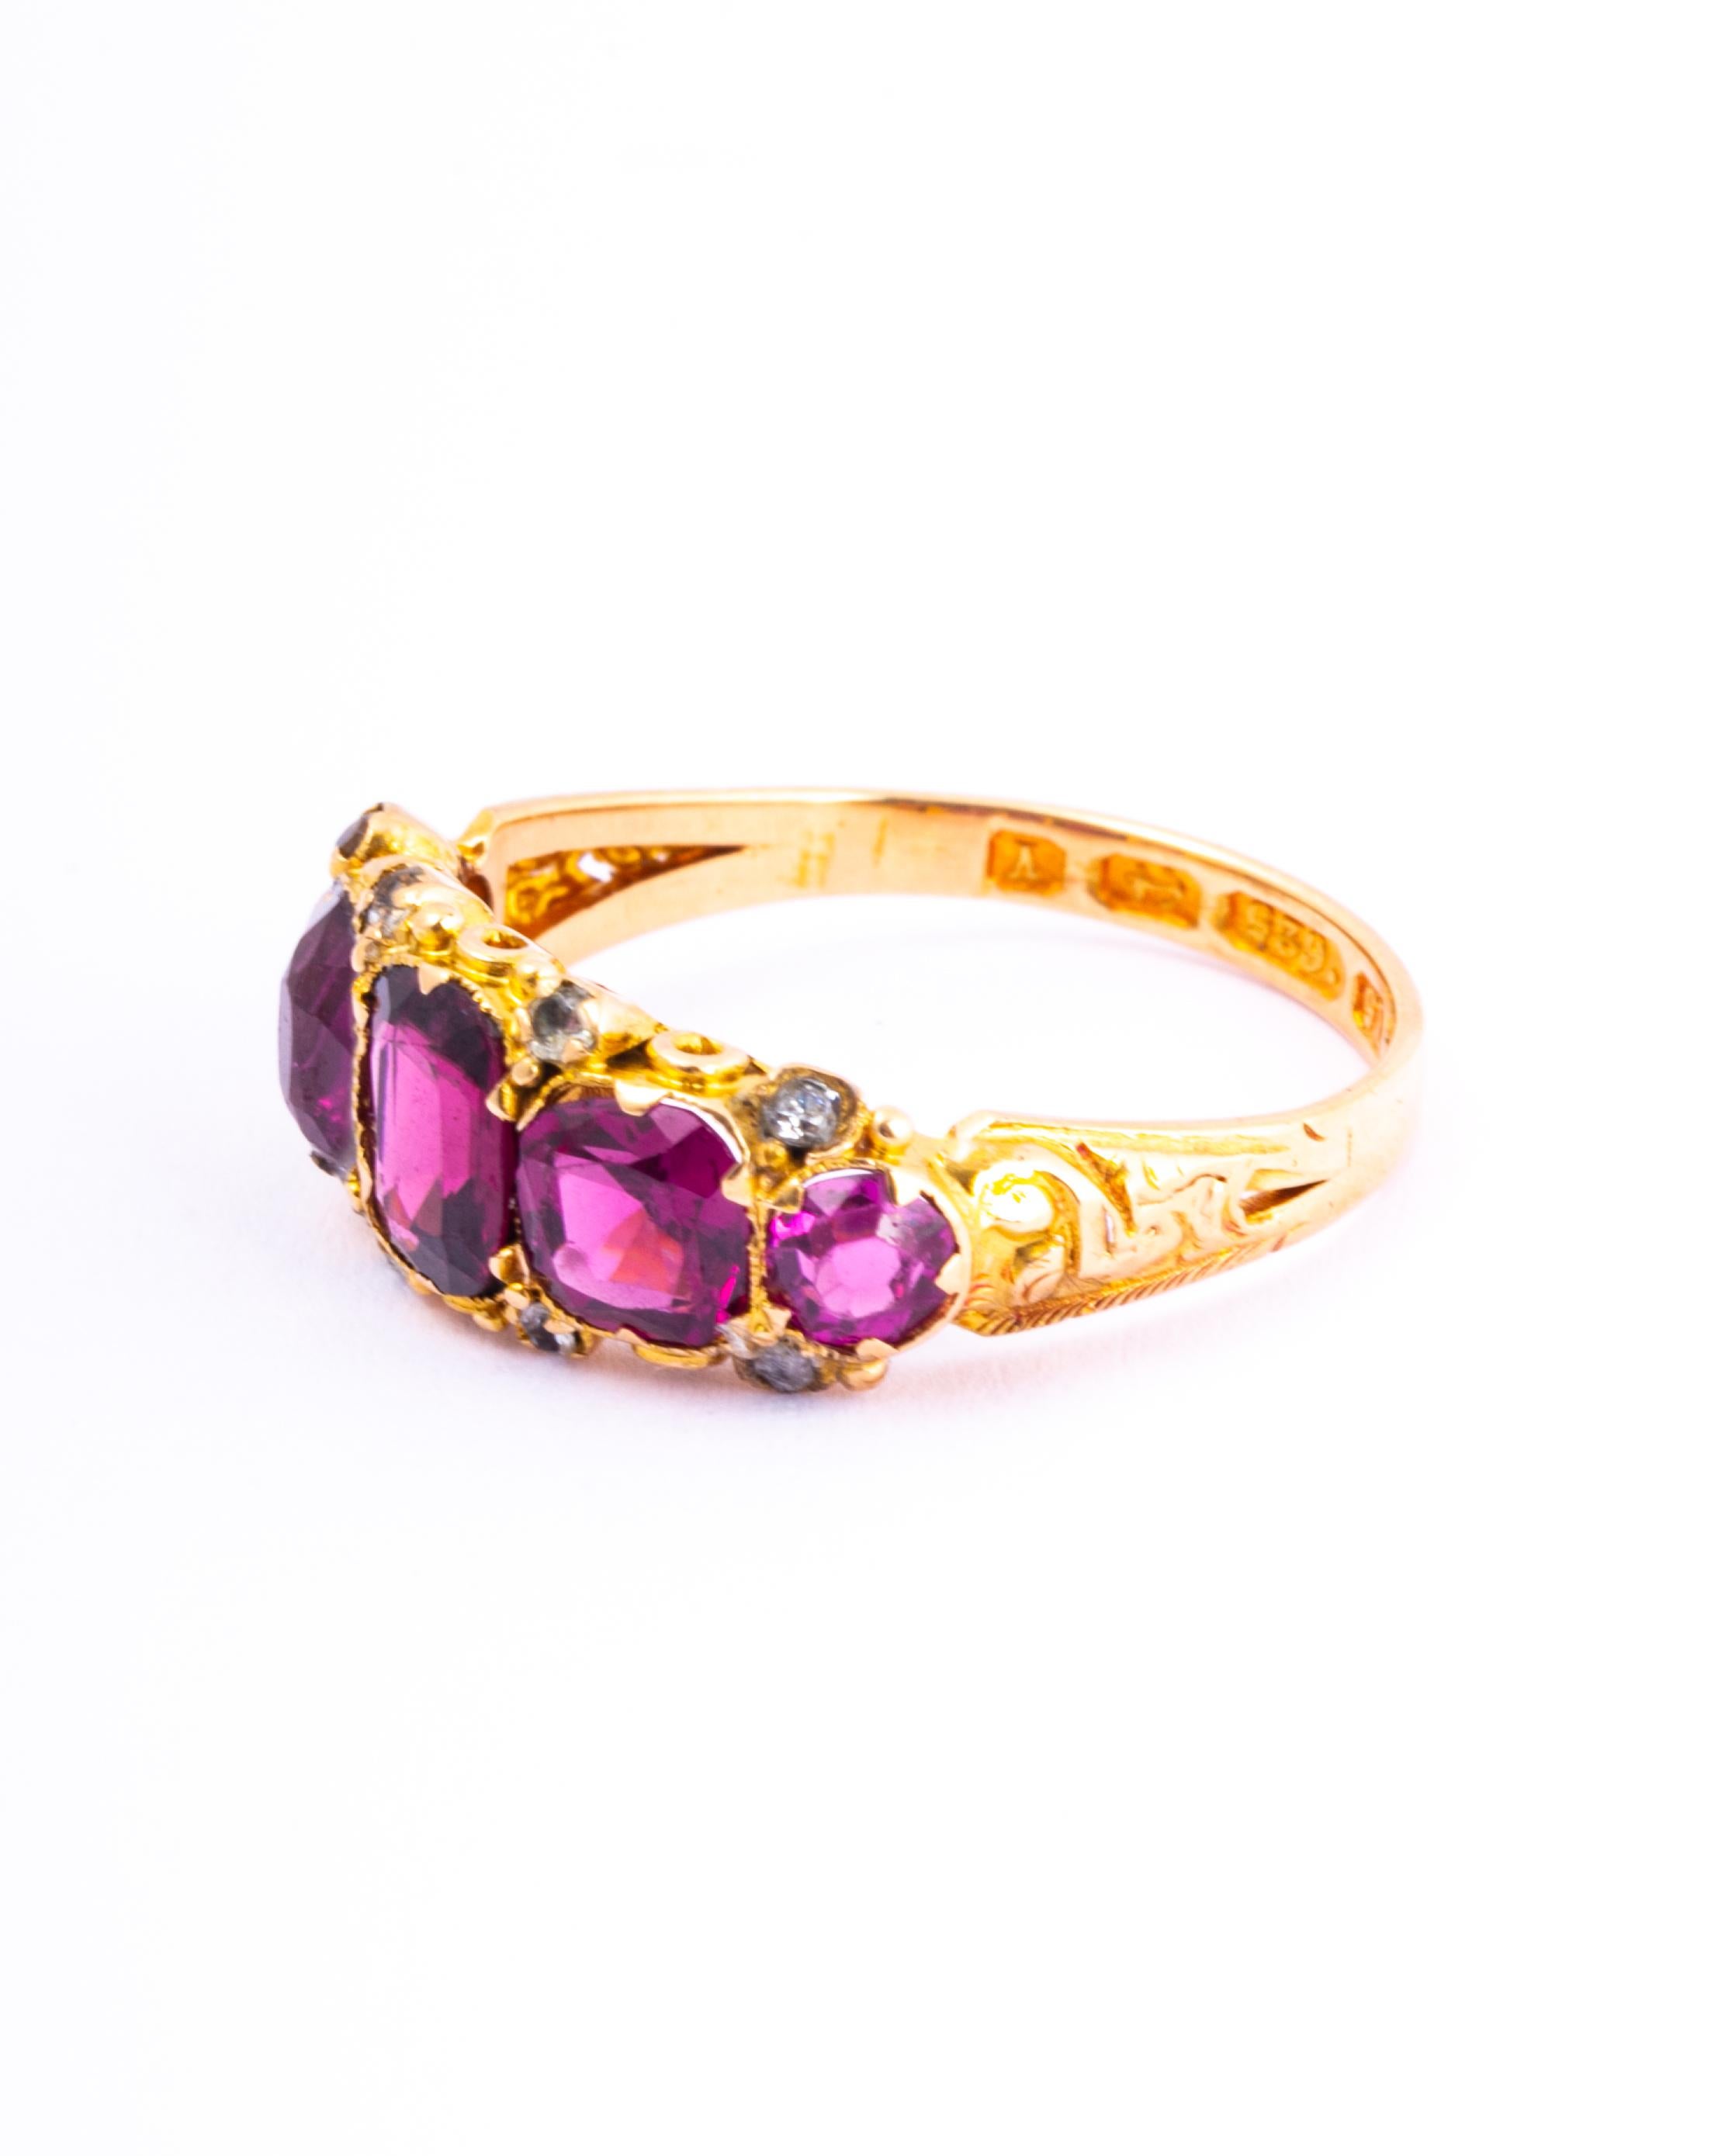 This stunner holds five deep pink tourmaline that are beautifully cut and catch the light just right to get that sparkle. They are set almost flush within the decorative 9ct gold band and also have pairs of rose cut diamonds set in between.  

Ring